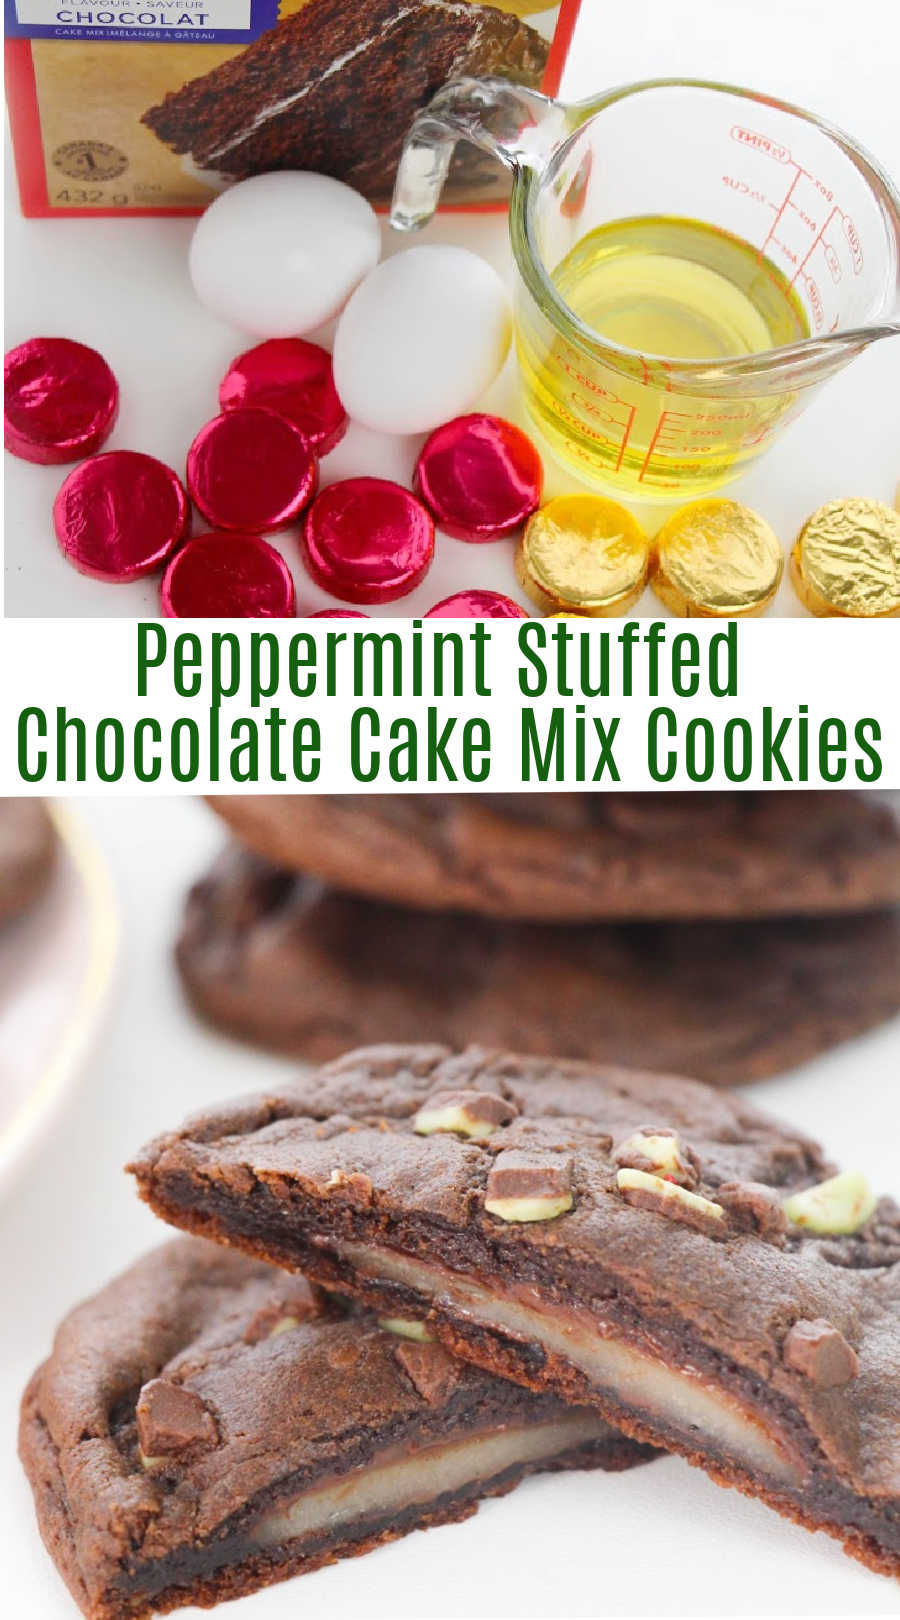 These simple chocolate cake mix cookies are stuffed with peppermint patties and topped with chocolate mint candies. They are a chocolate and mint lover’s dream come true! 